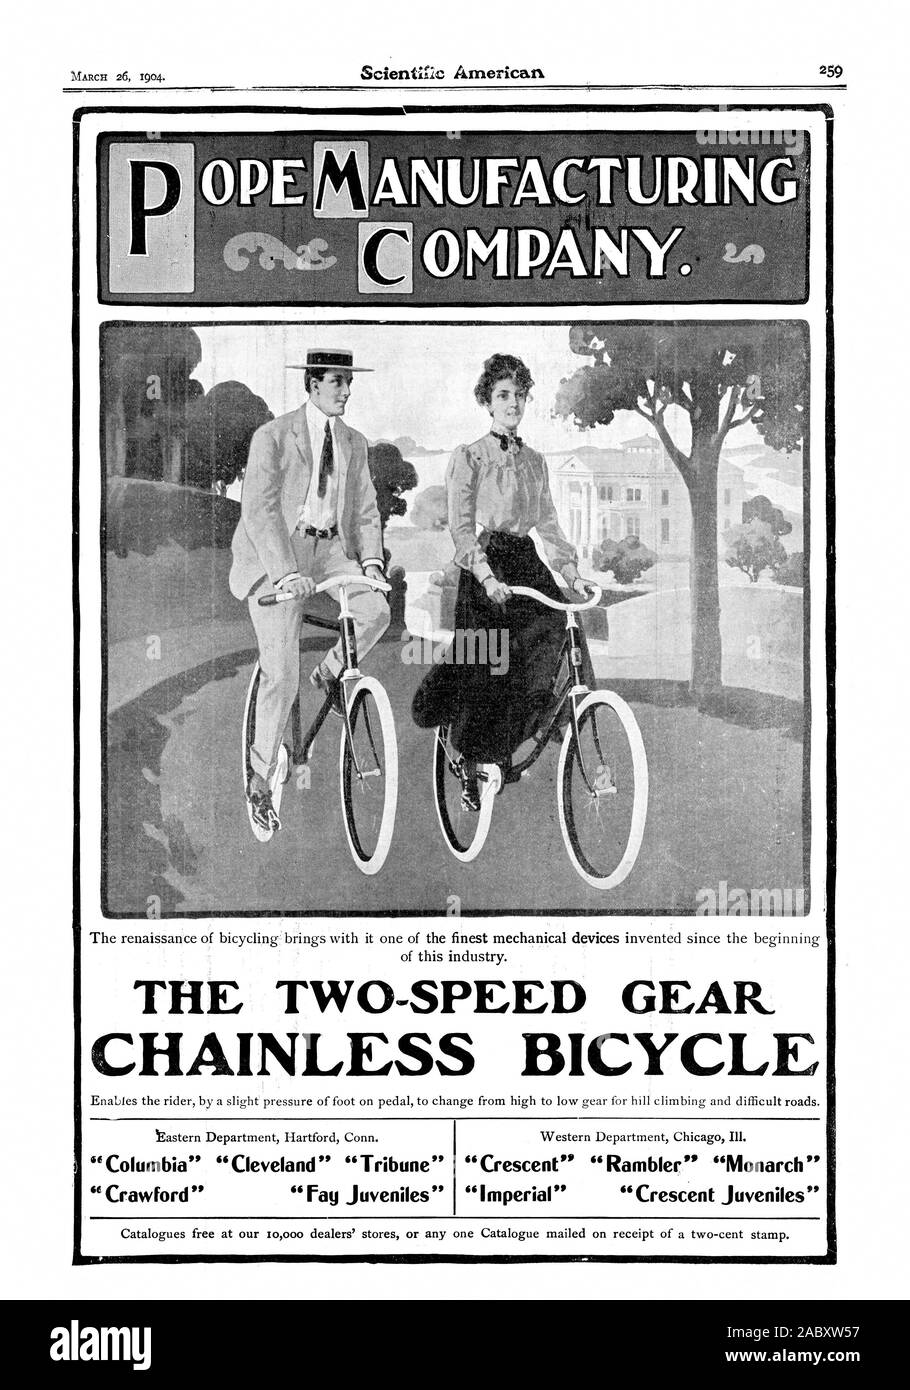 CHAINLESS BICYCLE 'Columbia' 'Cleveland' 'Tribune' 'Crawford' 'Fay Juveniles' 'Crescent' 'Rambler' 'Monarch' 'Imperial' 'Crescent Juveniles, scientific american, 1904-03-26 Stock Photo